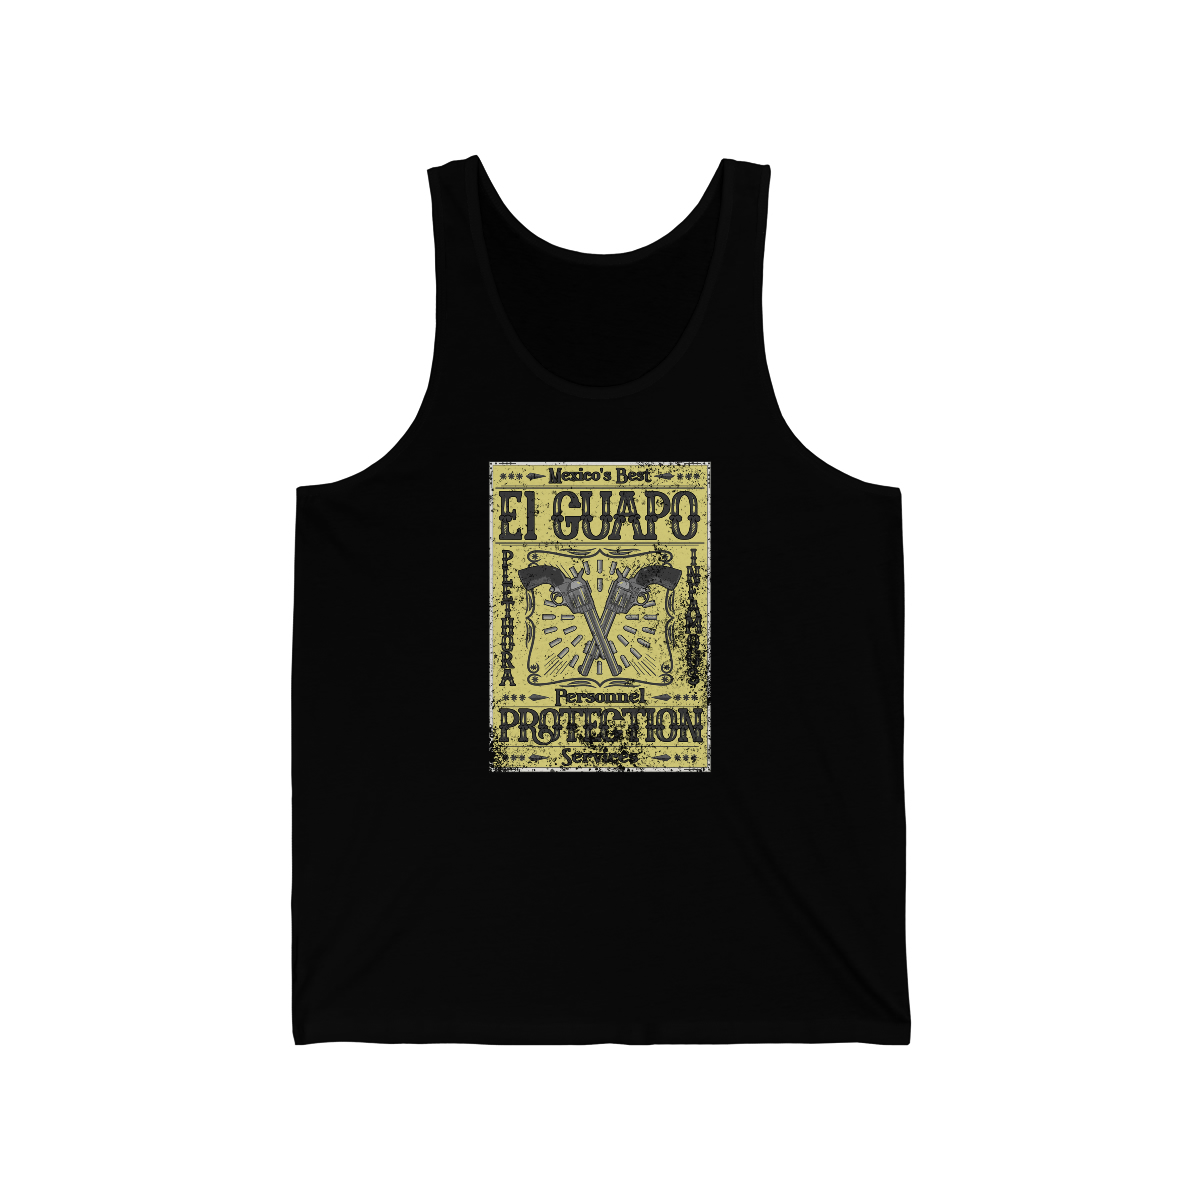 Personnel Protection (yellow) - Unisex Jersey Tank